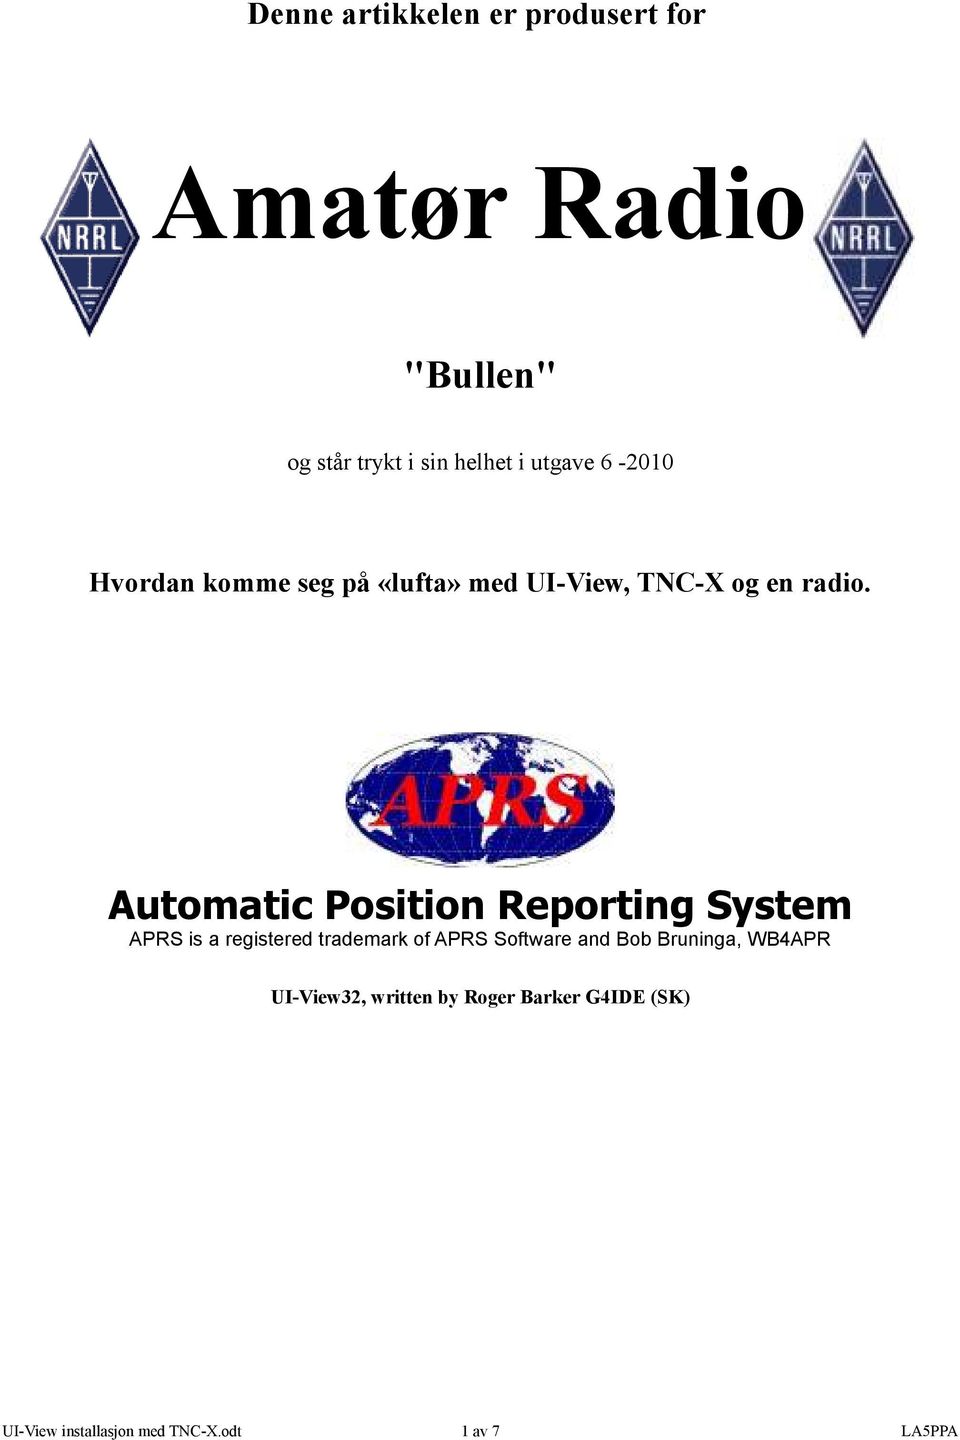 Automatic Position Reporting System APRS is a registered trademark of APRS Software and